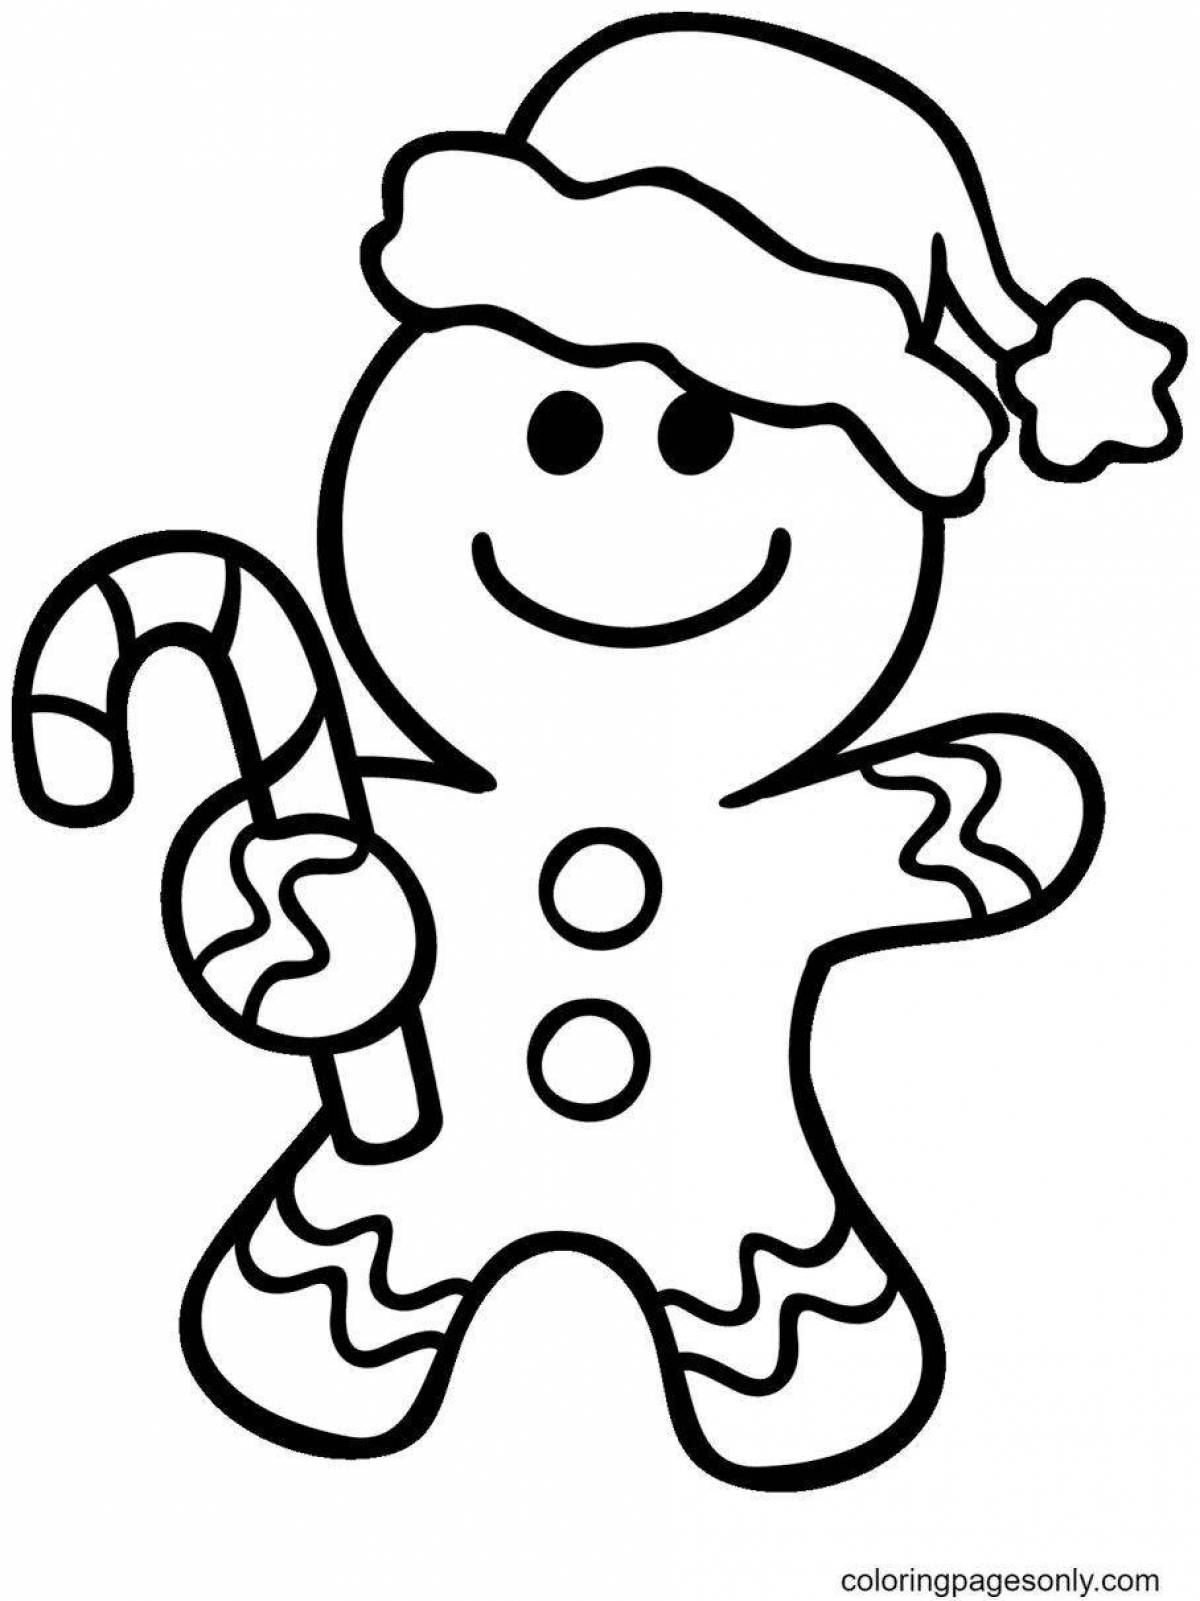 Healthy gingerbread coloring page